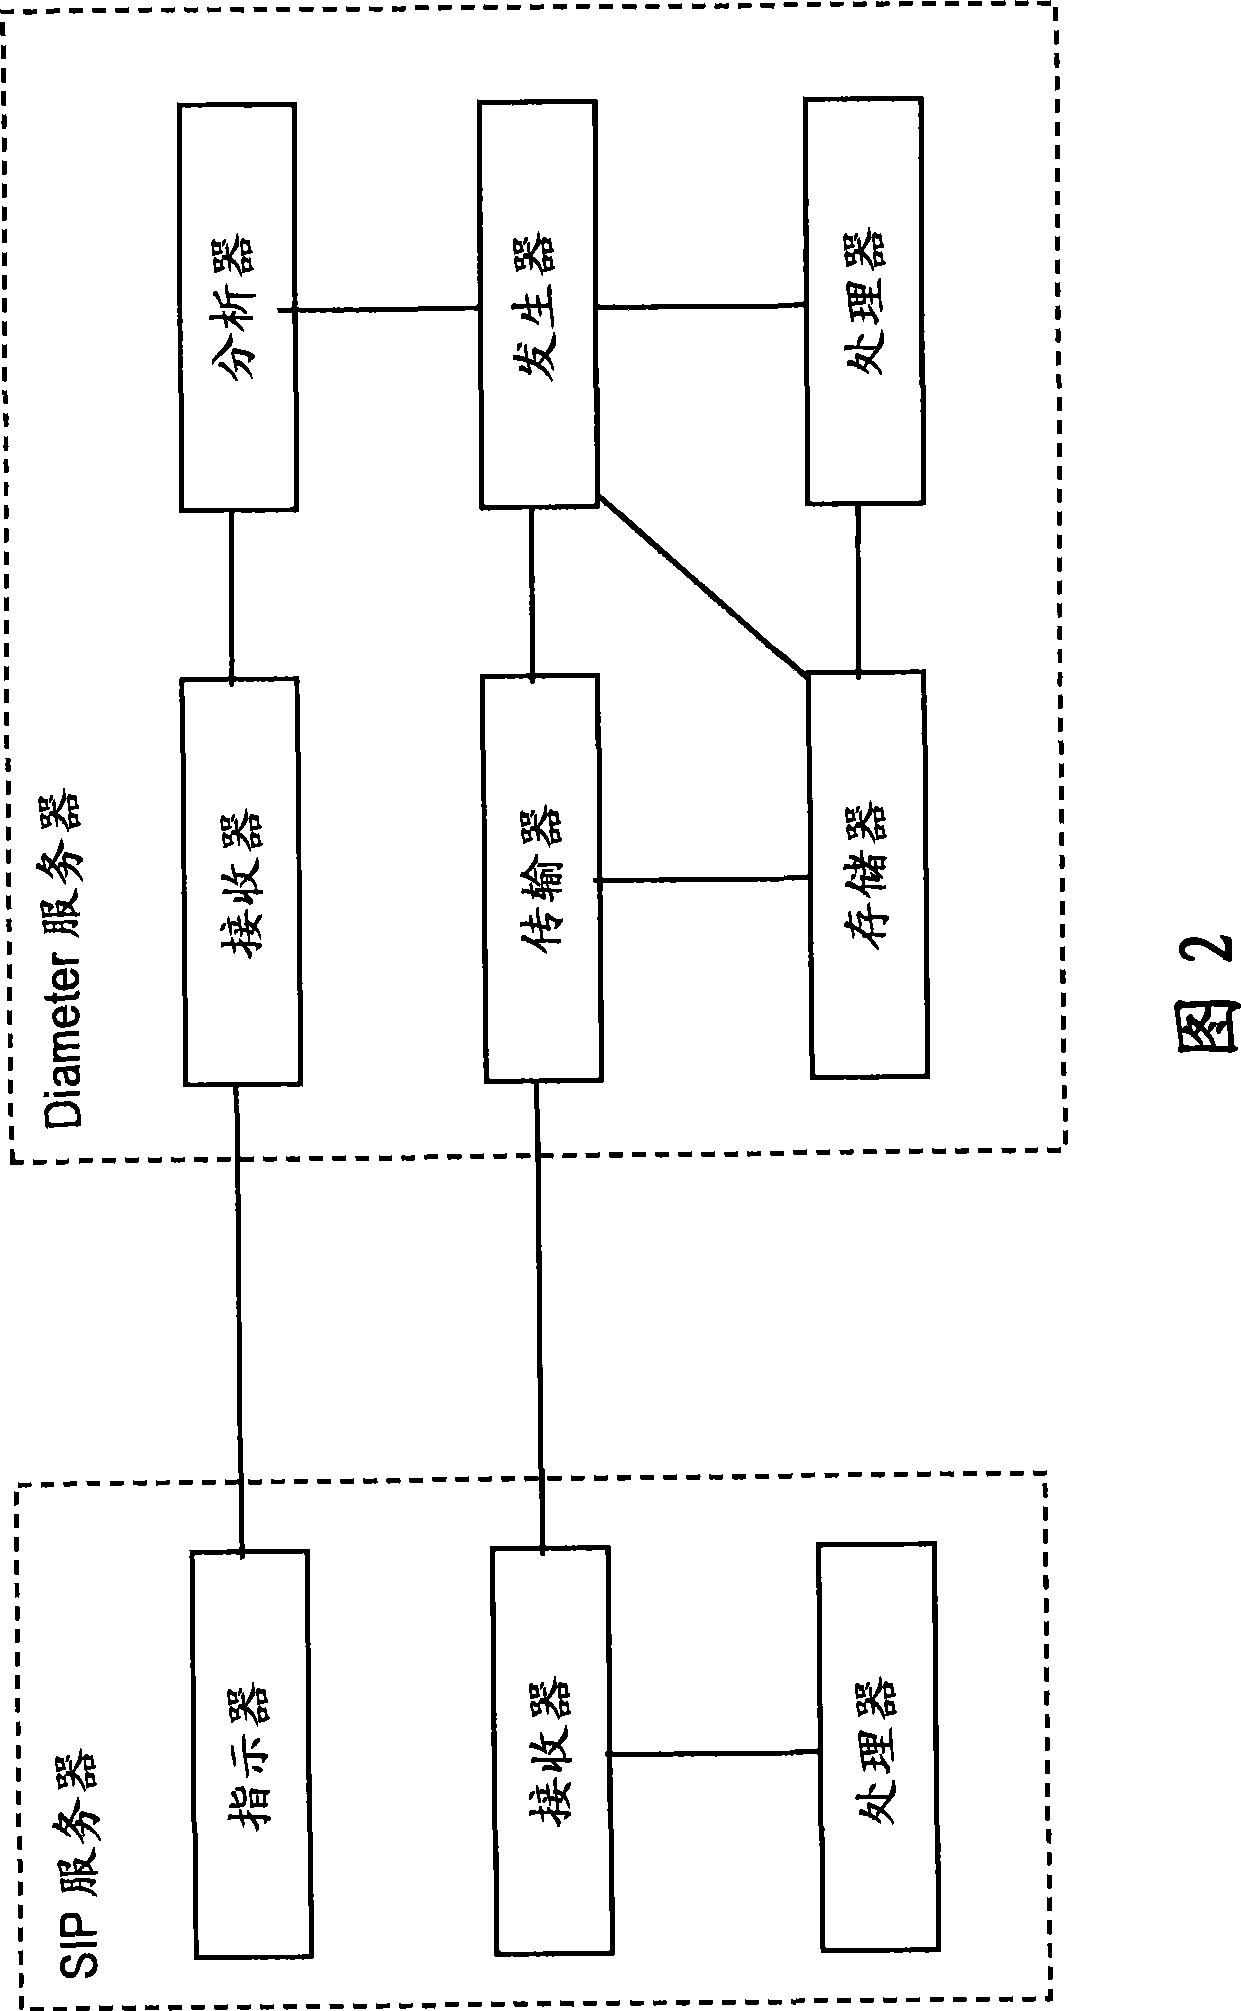 Method, apparatuses and computer media for nonce-based authentication scheme comprising indication of session control server's operation mode in authentication request